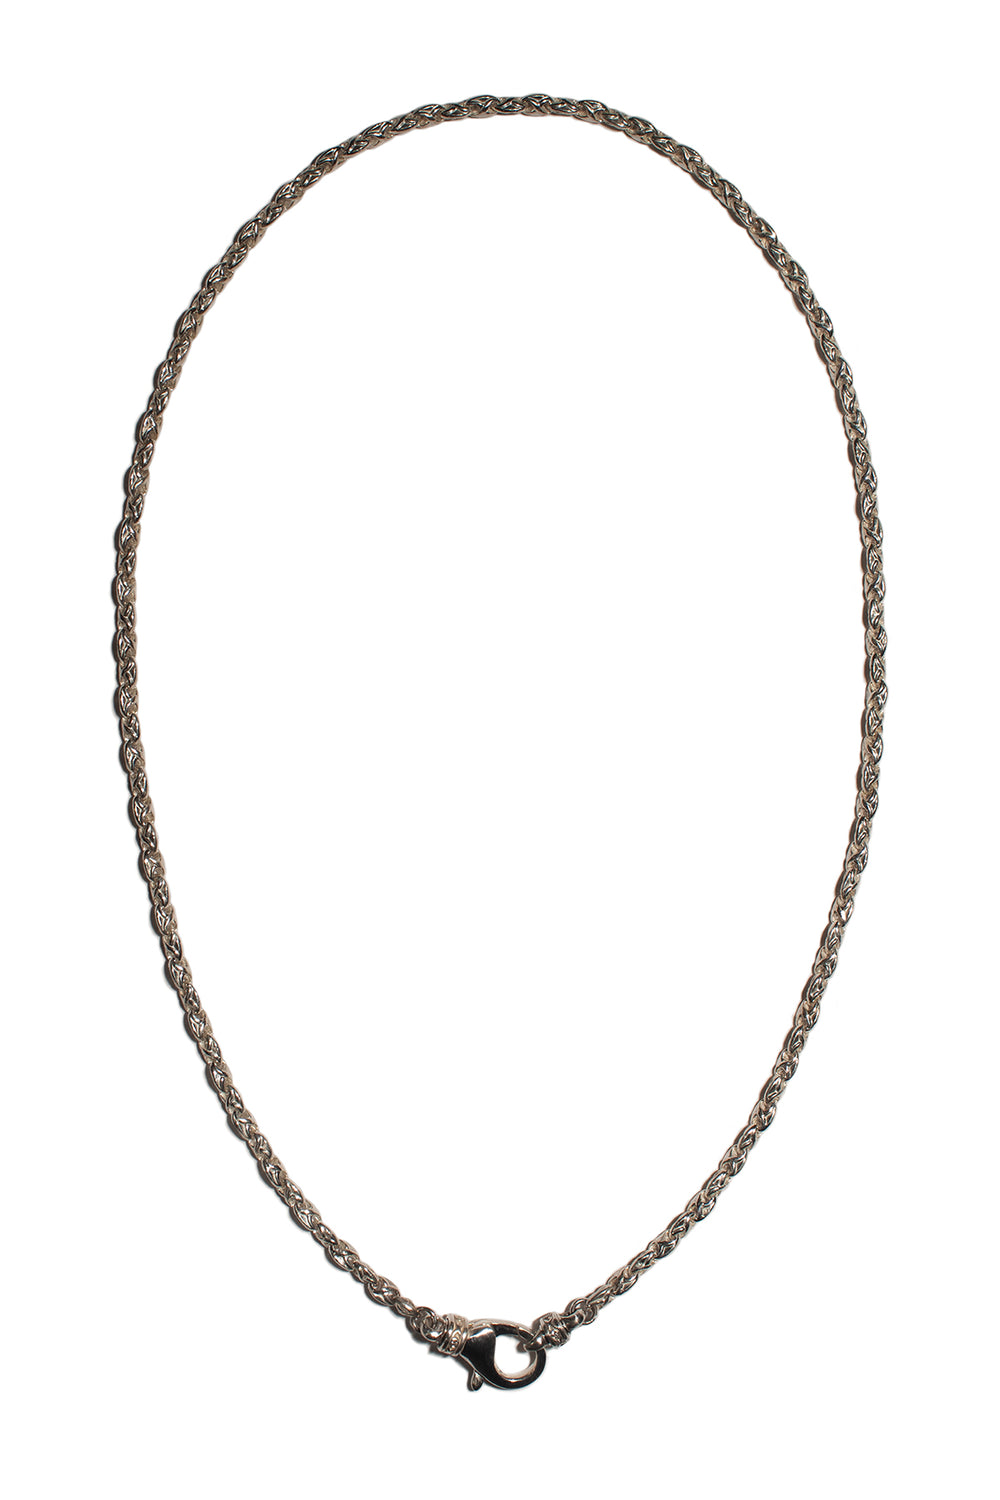 J & F | SILVER TRISTAN & ISOLDE S NECKLACE